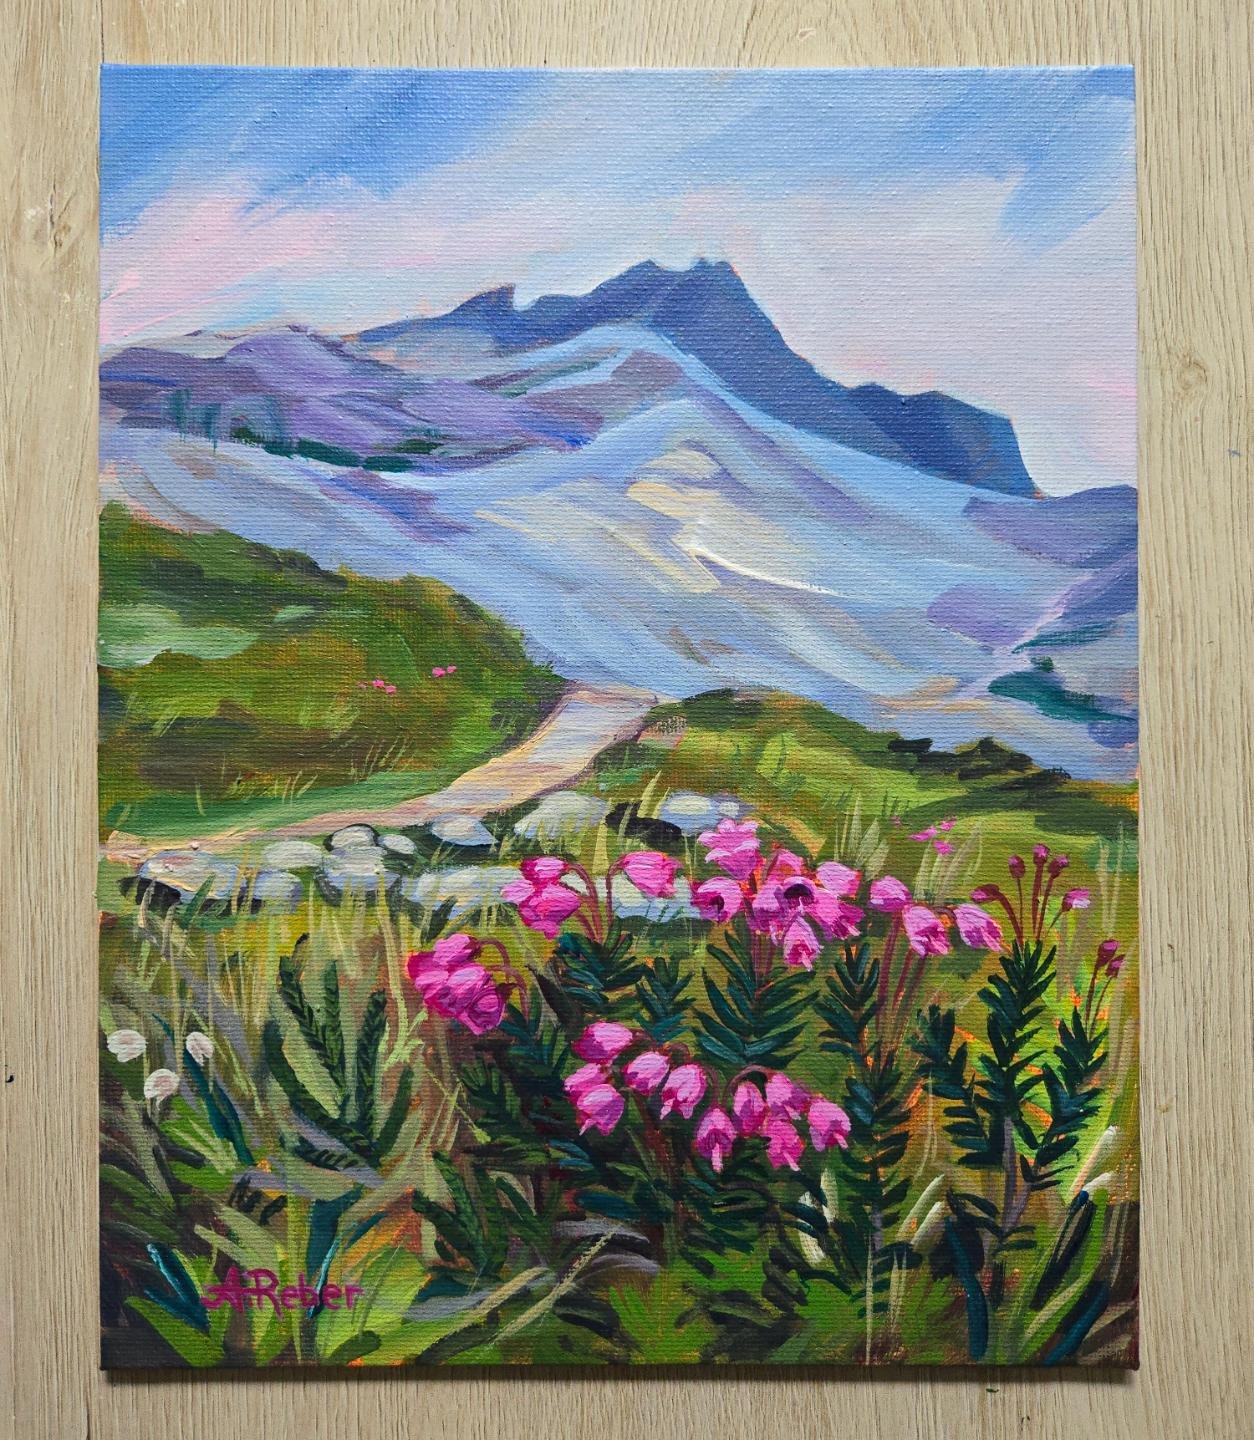 This beauty will be a part of my &quot;Wildflower&quot; series which will launching in a week! 
And the awesome part is, you can choose your price!

Want early access to purchase the Wildflower series paintings? Head to my website and join my subscri